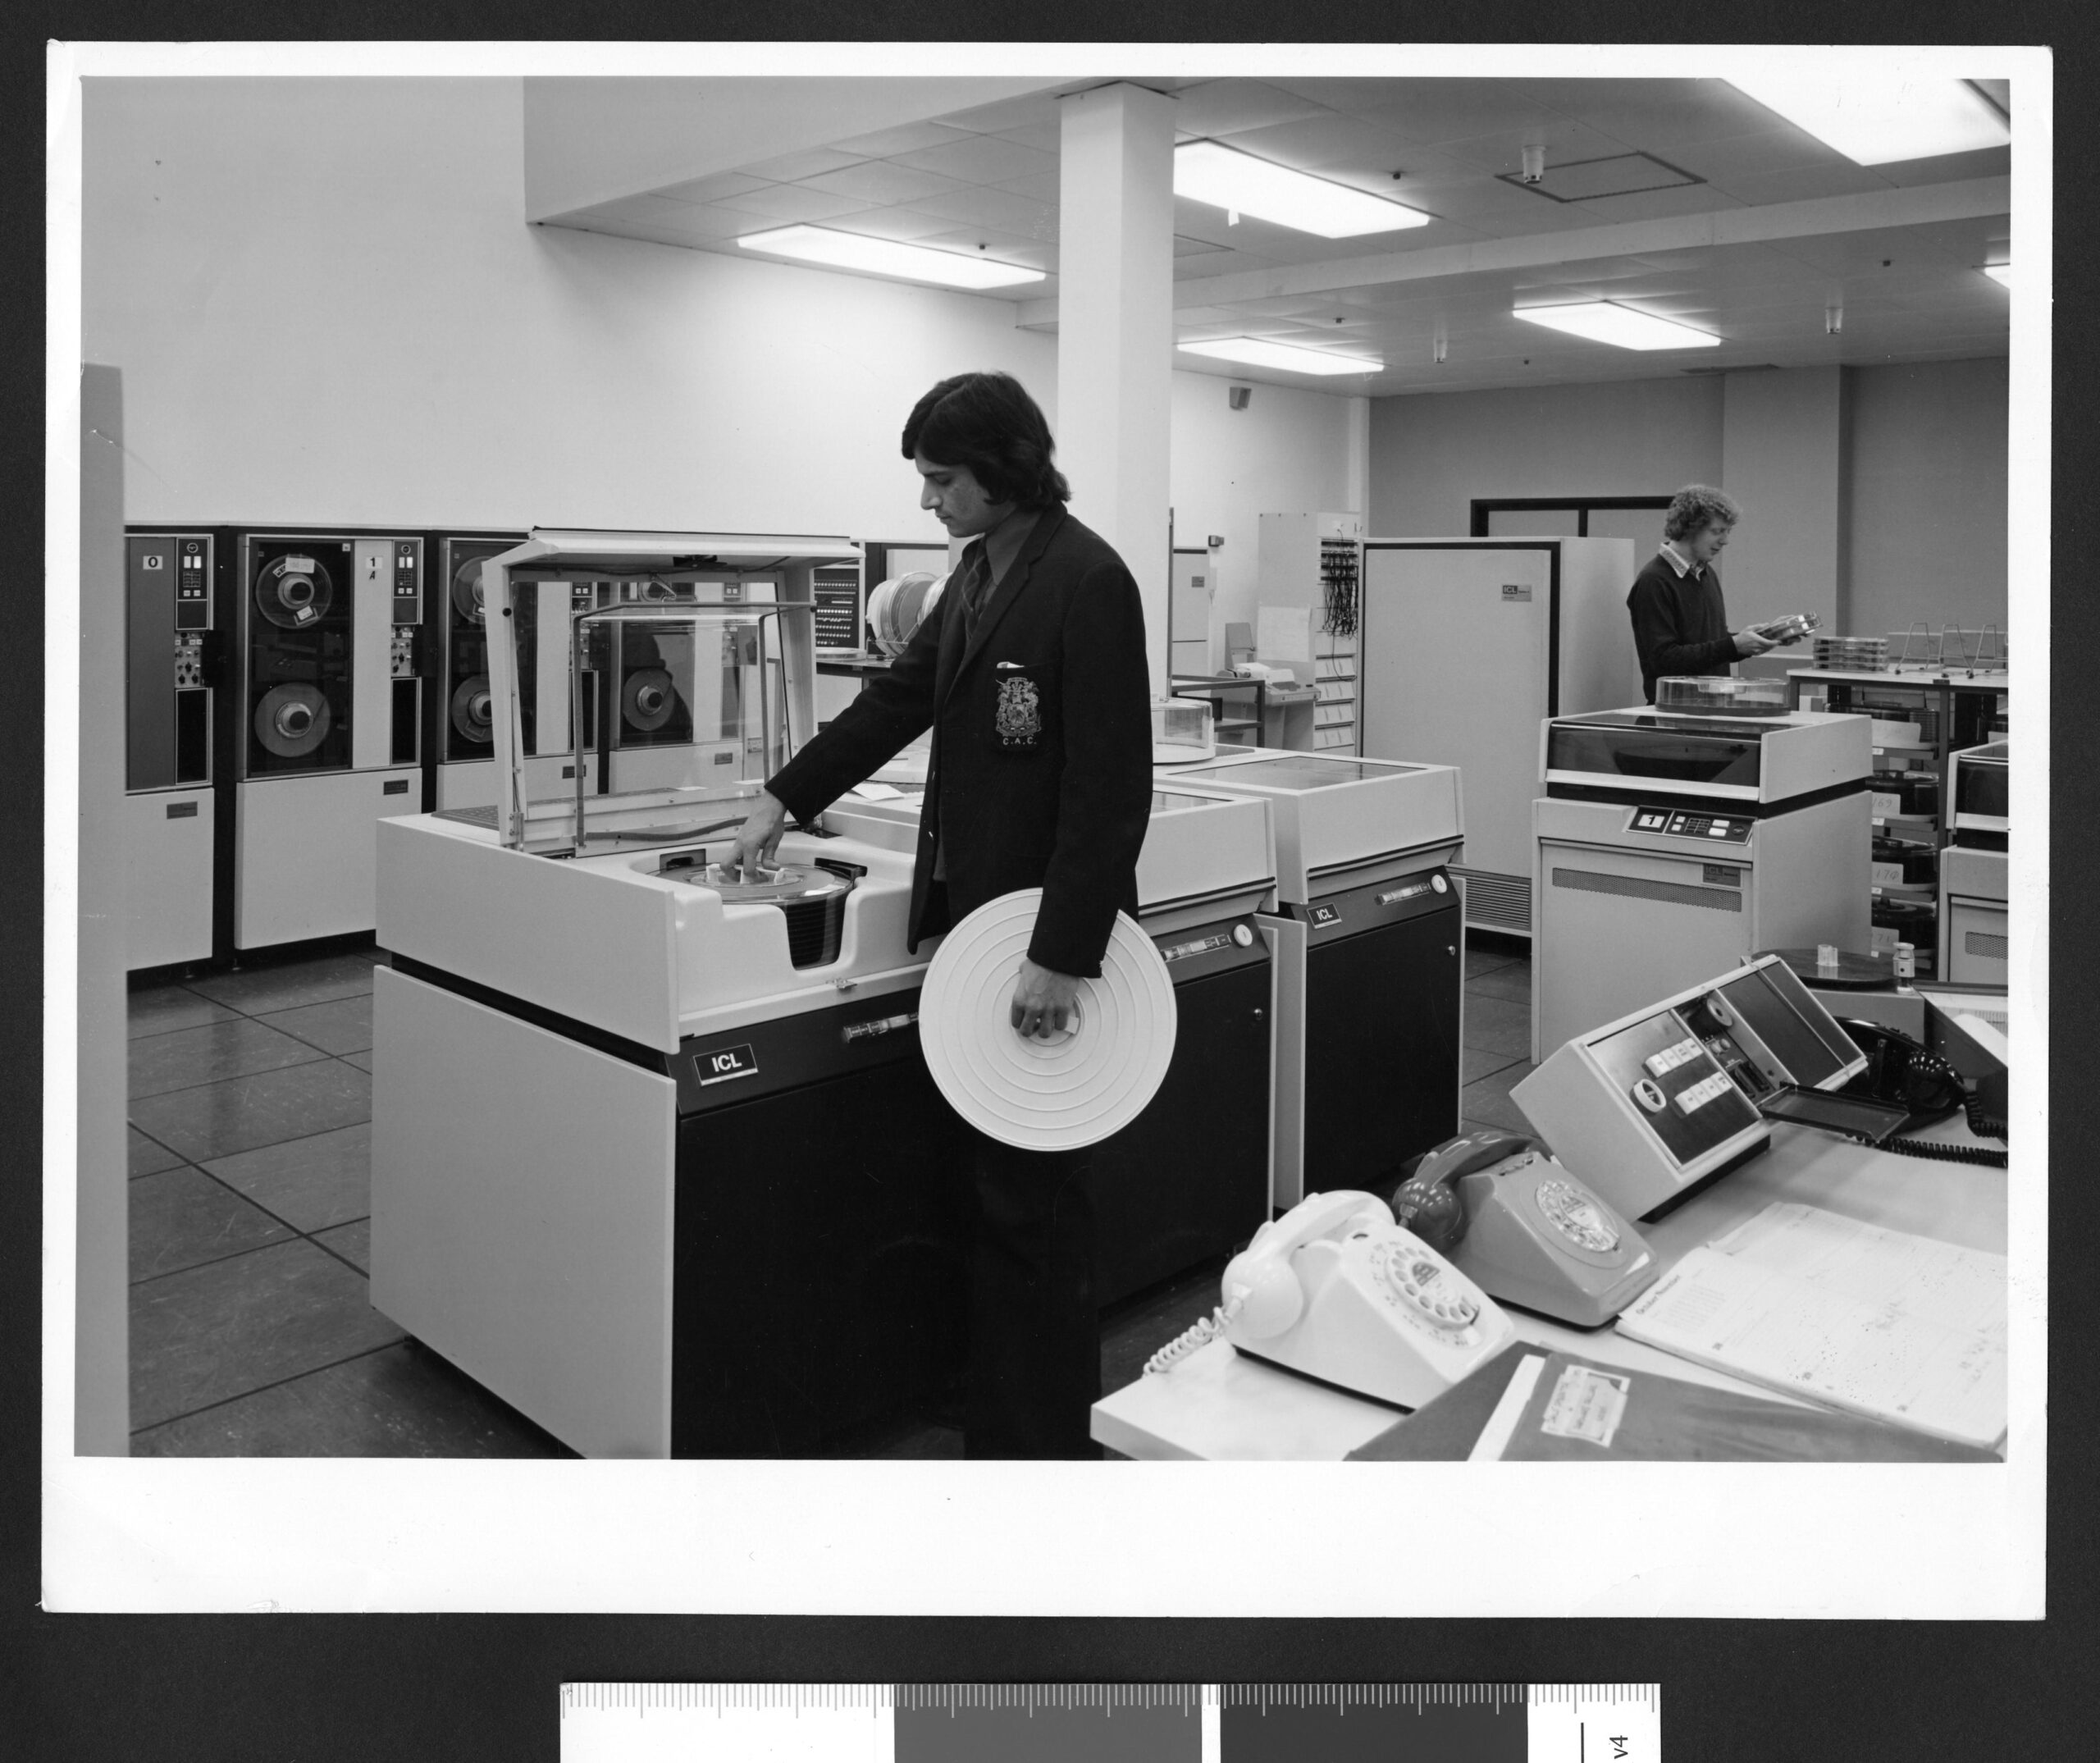 Students using the ICL System 4-50 computer [2], late 1960s